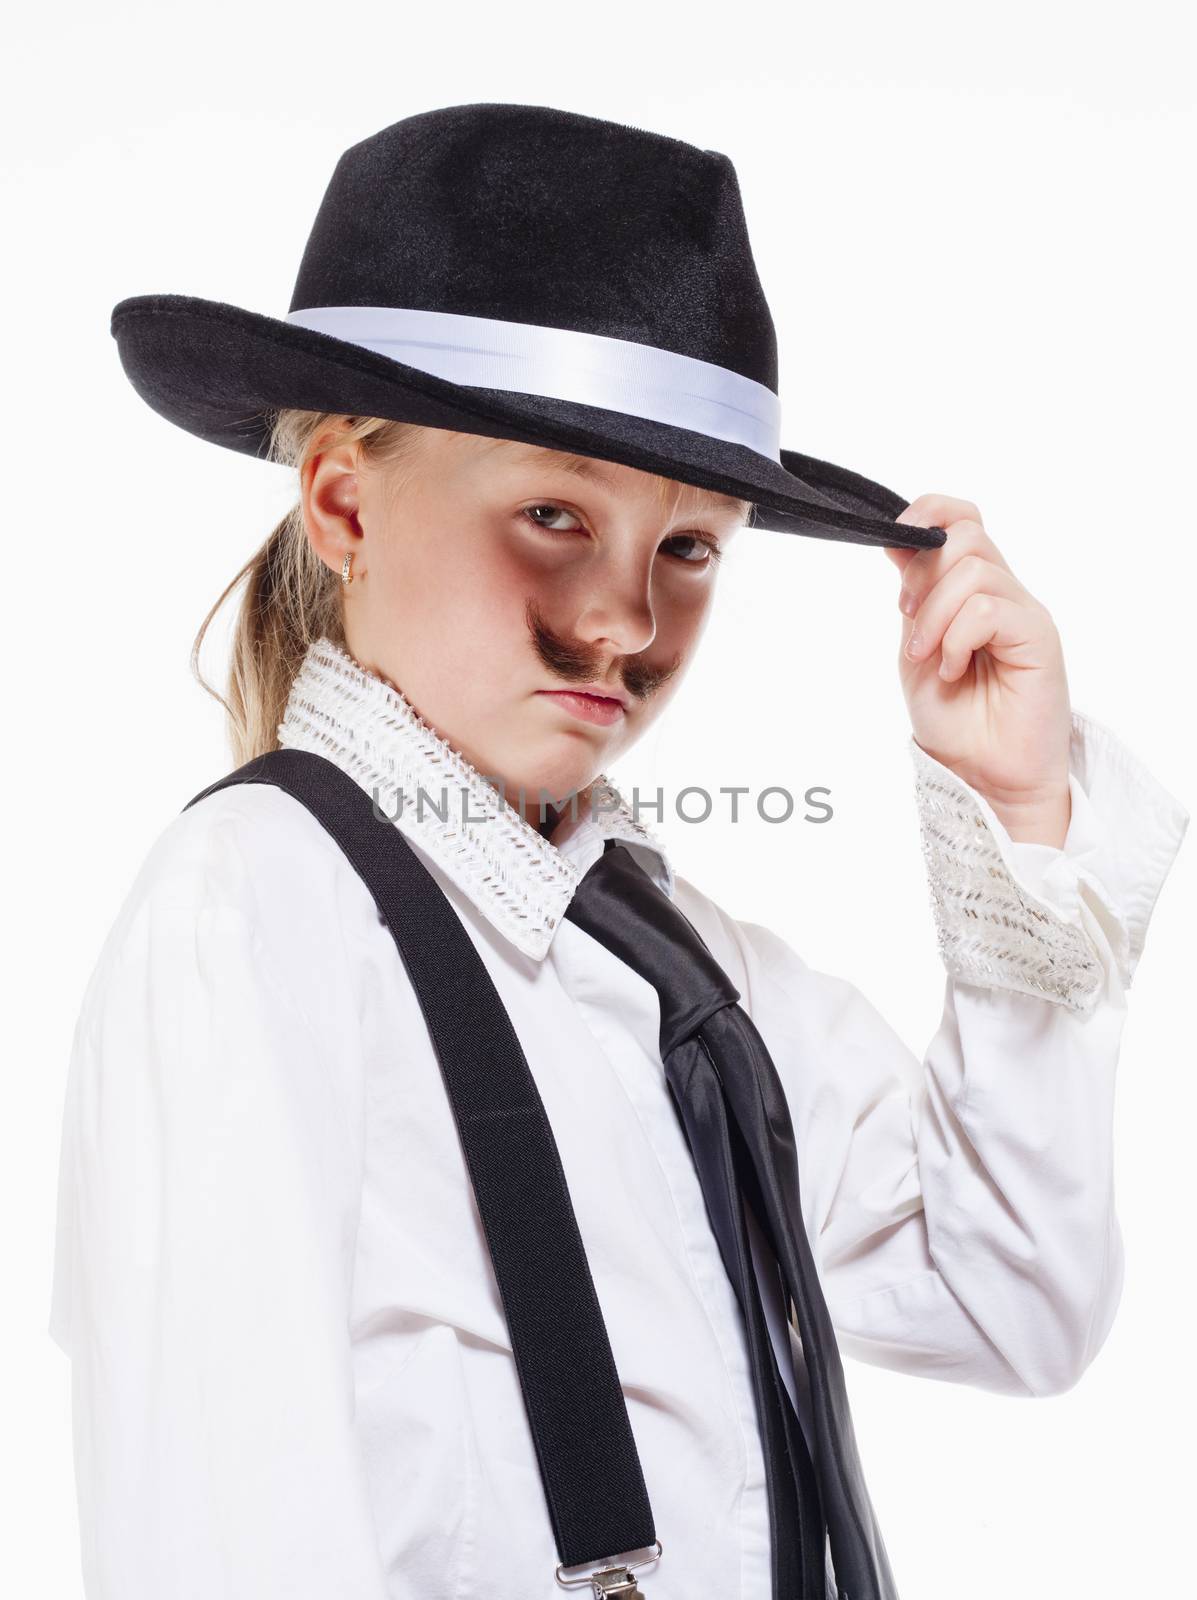 Portrait of a Little Girl with Hat Posing as a Gangster